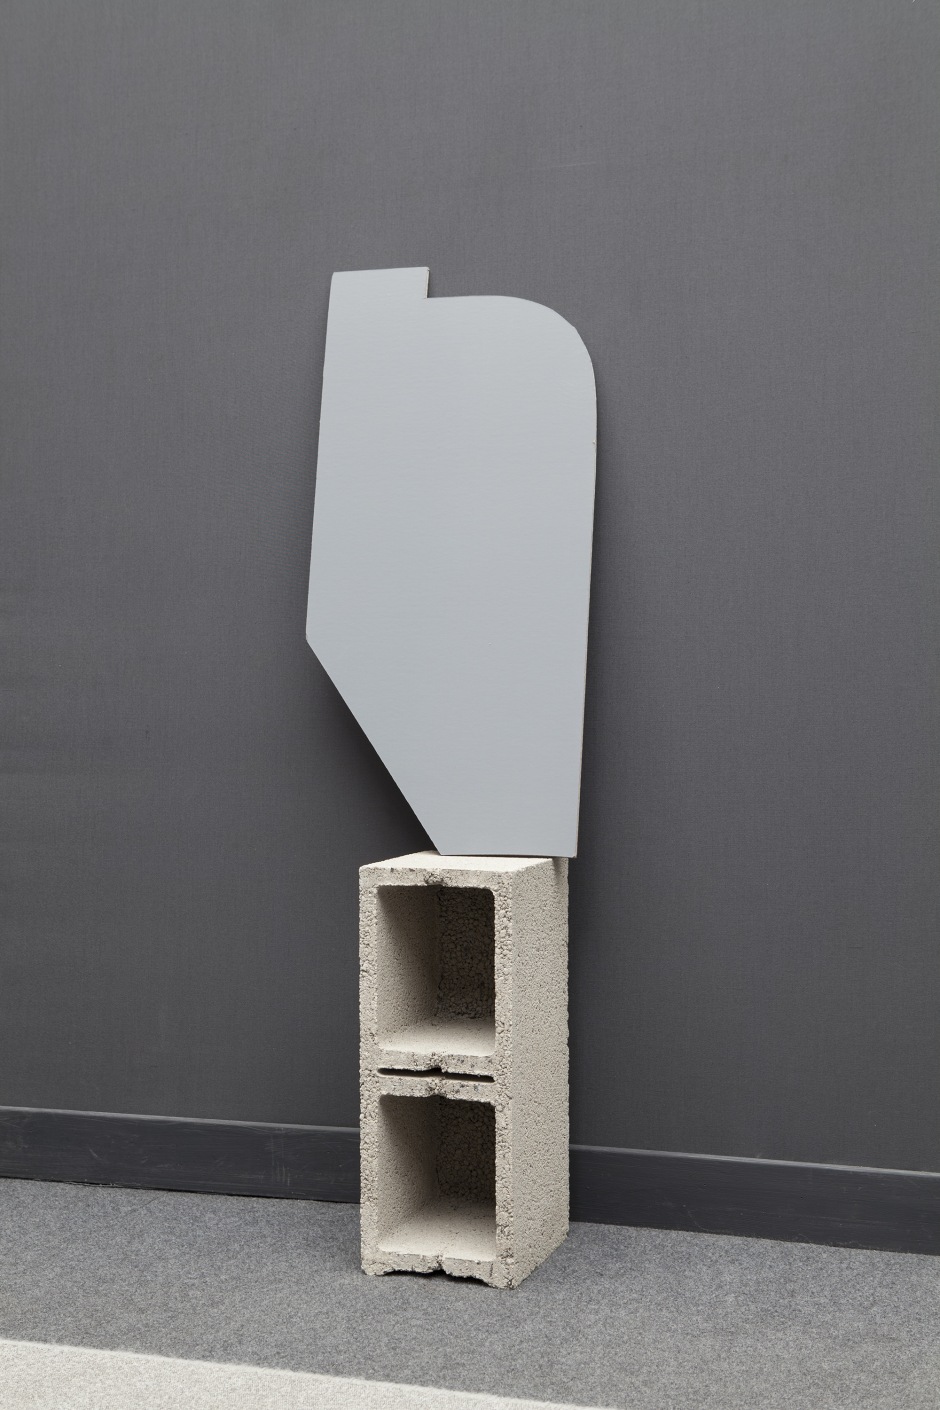 Counter Forms, 2014  painted cardboard with cinderblocks  dimensions variable